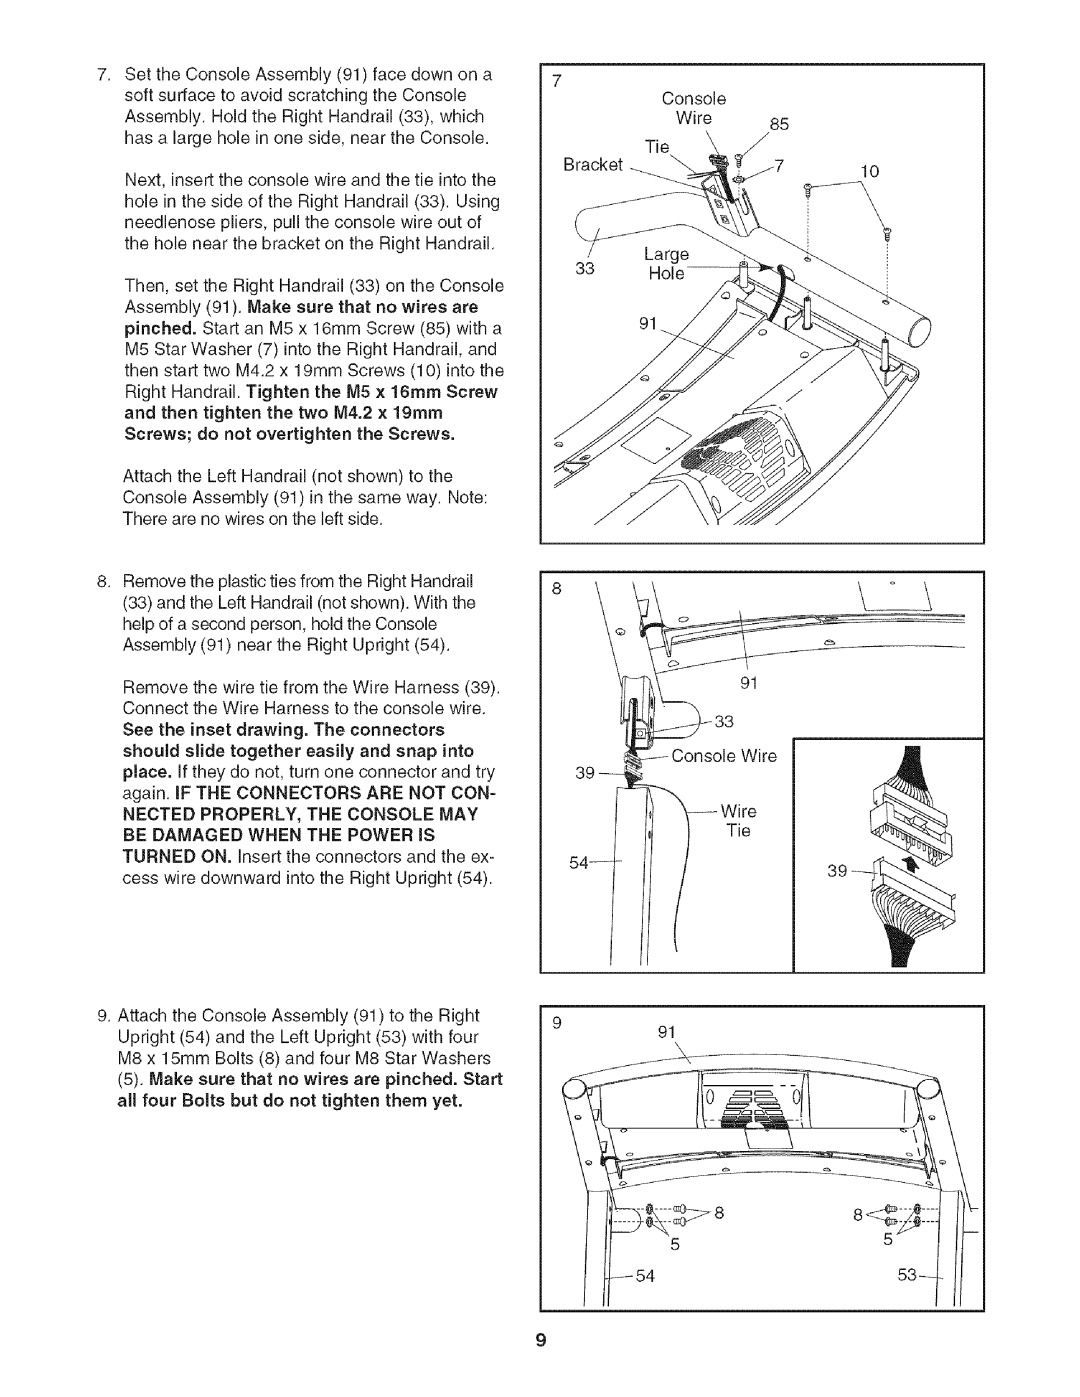 Sears 831.24733.0 user manual AttachtheLeftHandrailnotshownto the 